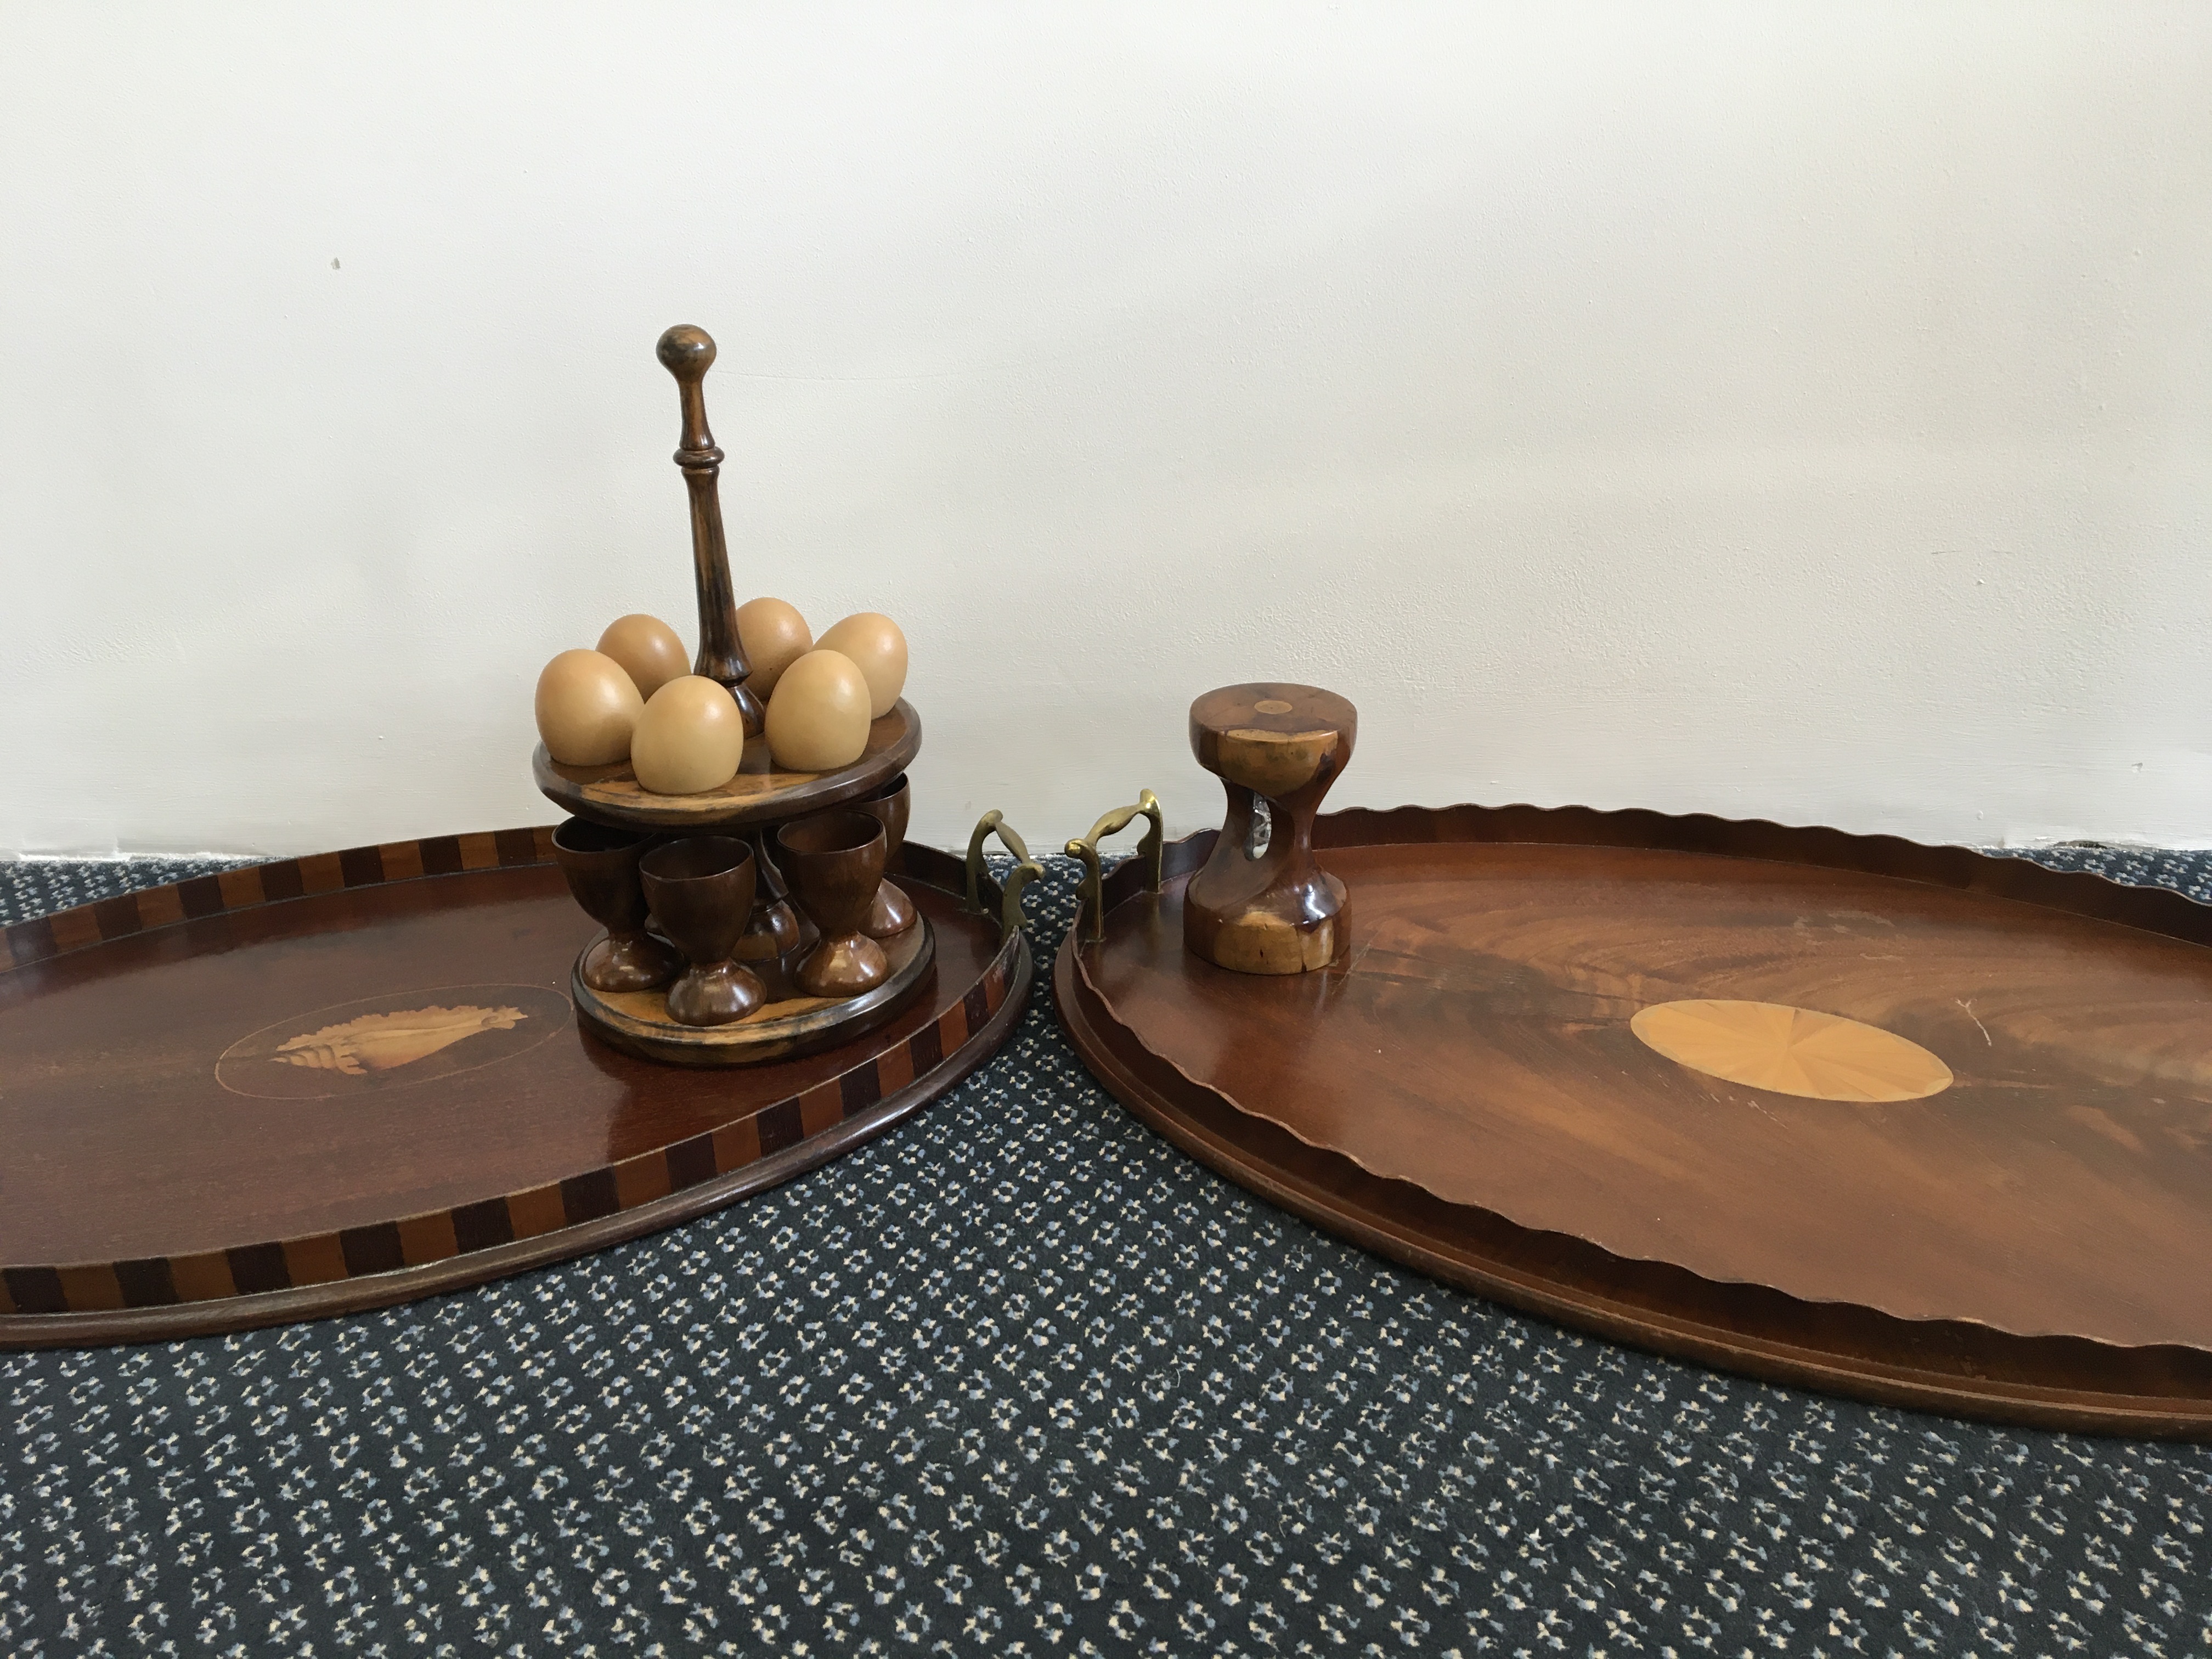 Two mahogany trays with inlay designs, together with a timer and an egg stand, with six cups and six